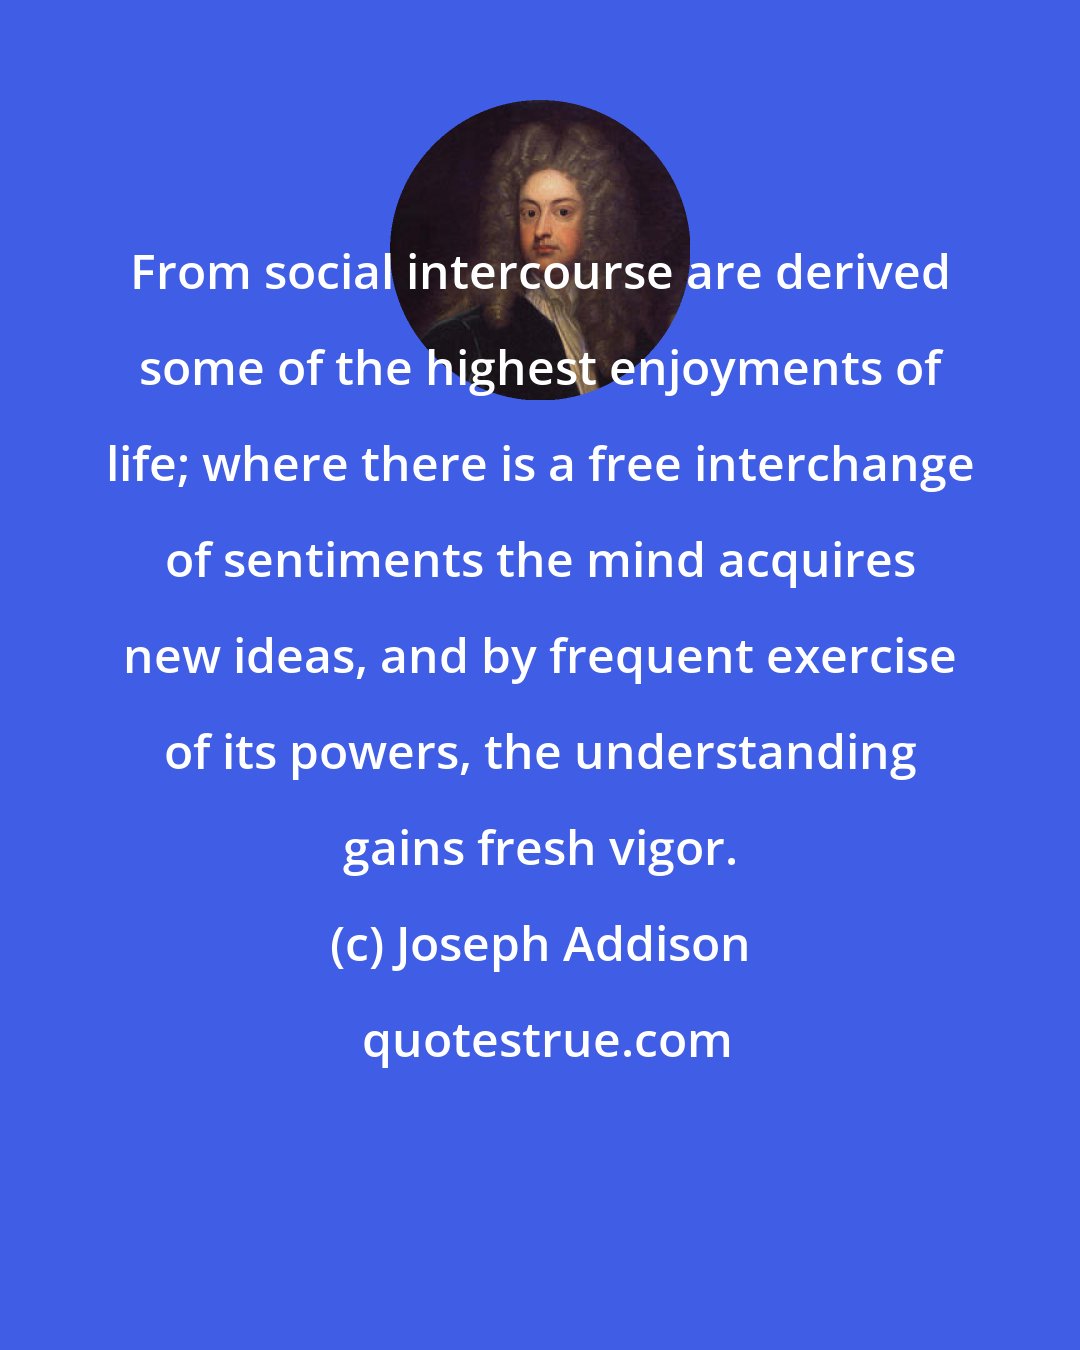 Joseph Addison: From social intercourse are derived some of the highest enjoyments of life; where there is a free interchange of sentiments the mind acquires new ideas, and by frequent exercise of its powers, the understanding gains fresh vigor.